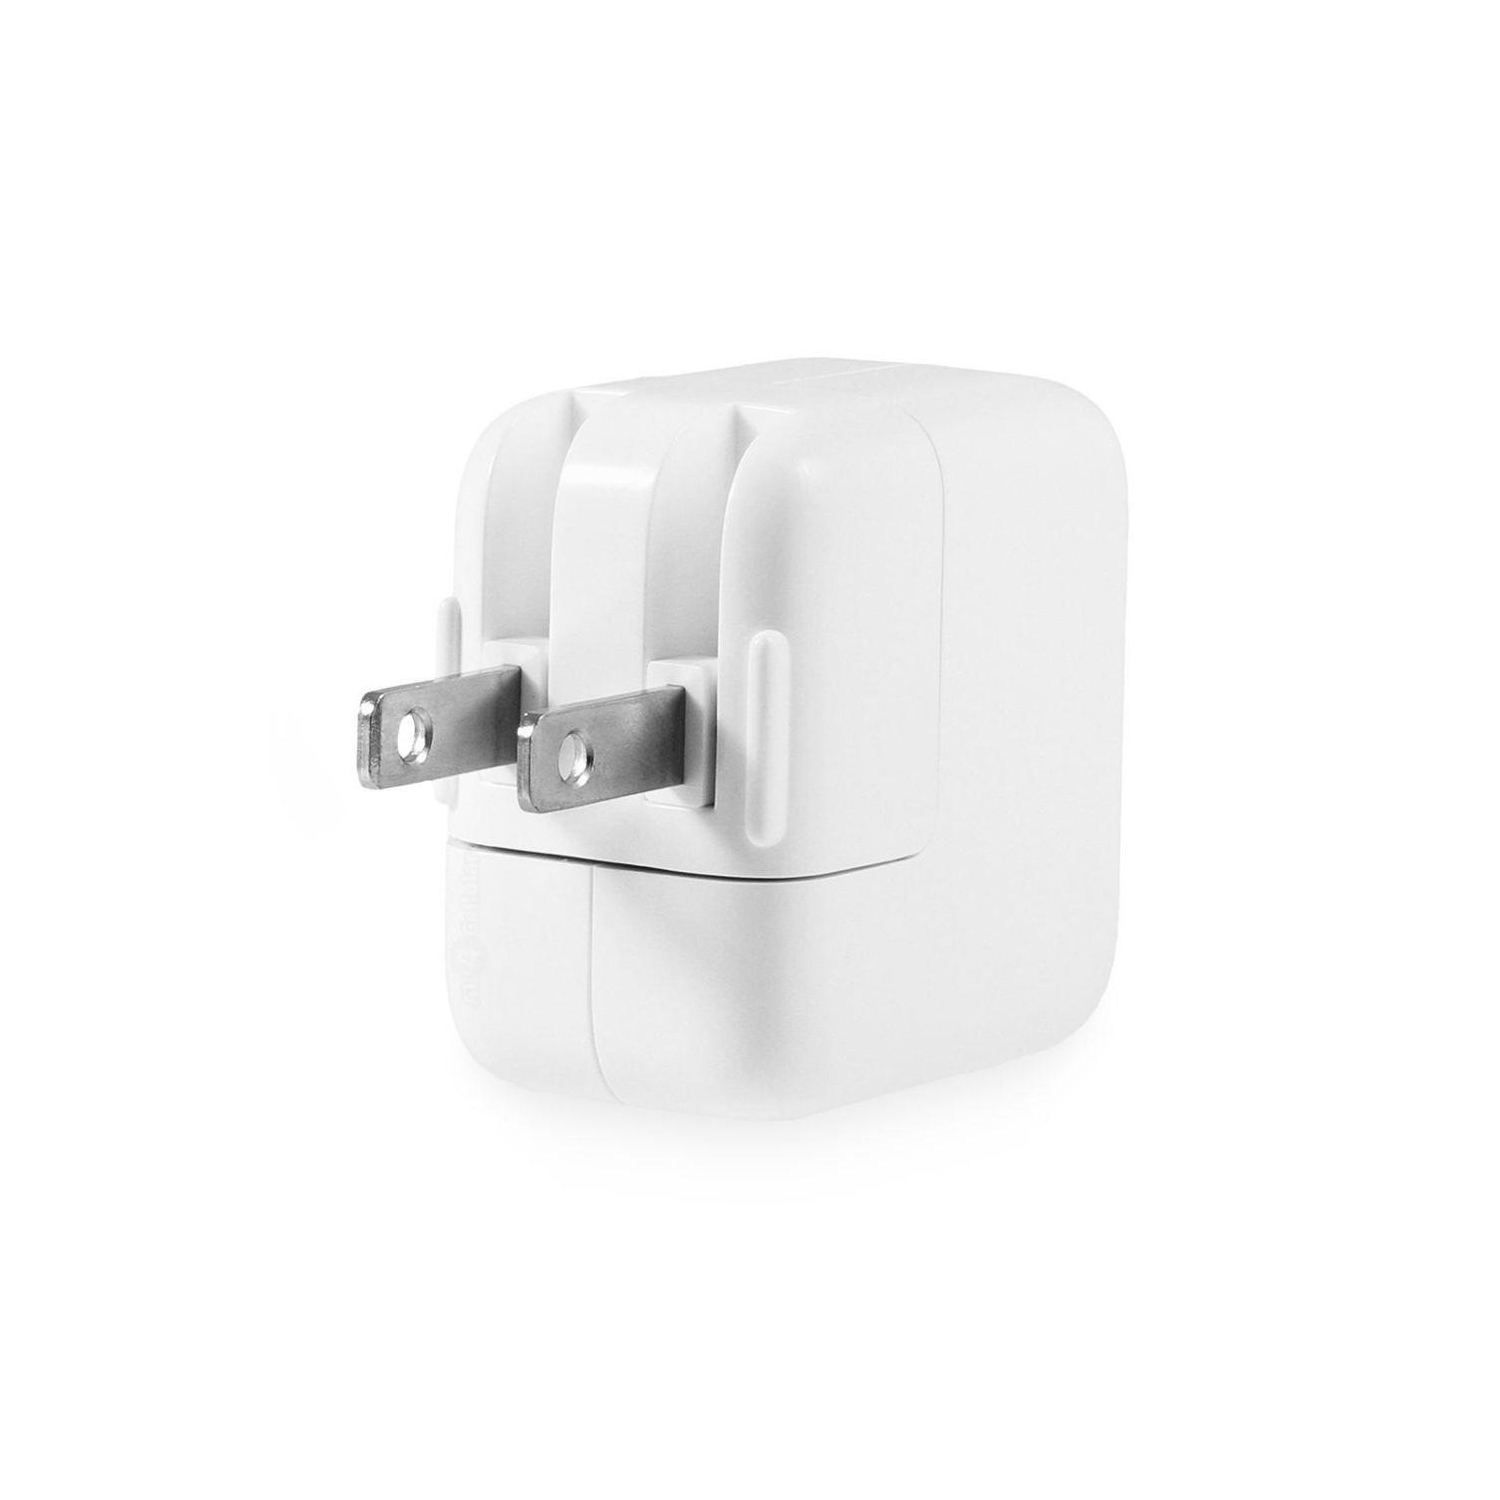 10W AC USB Power Wall Plug Charger Travel Adapter Cube for iPhone iPad Mini Air Pro iPod Models